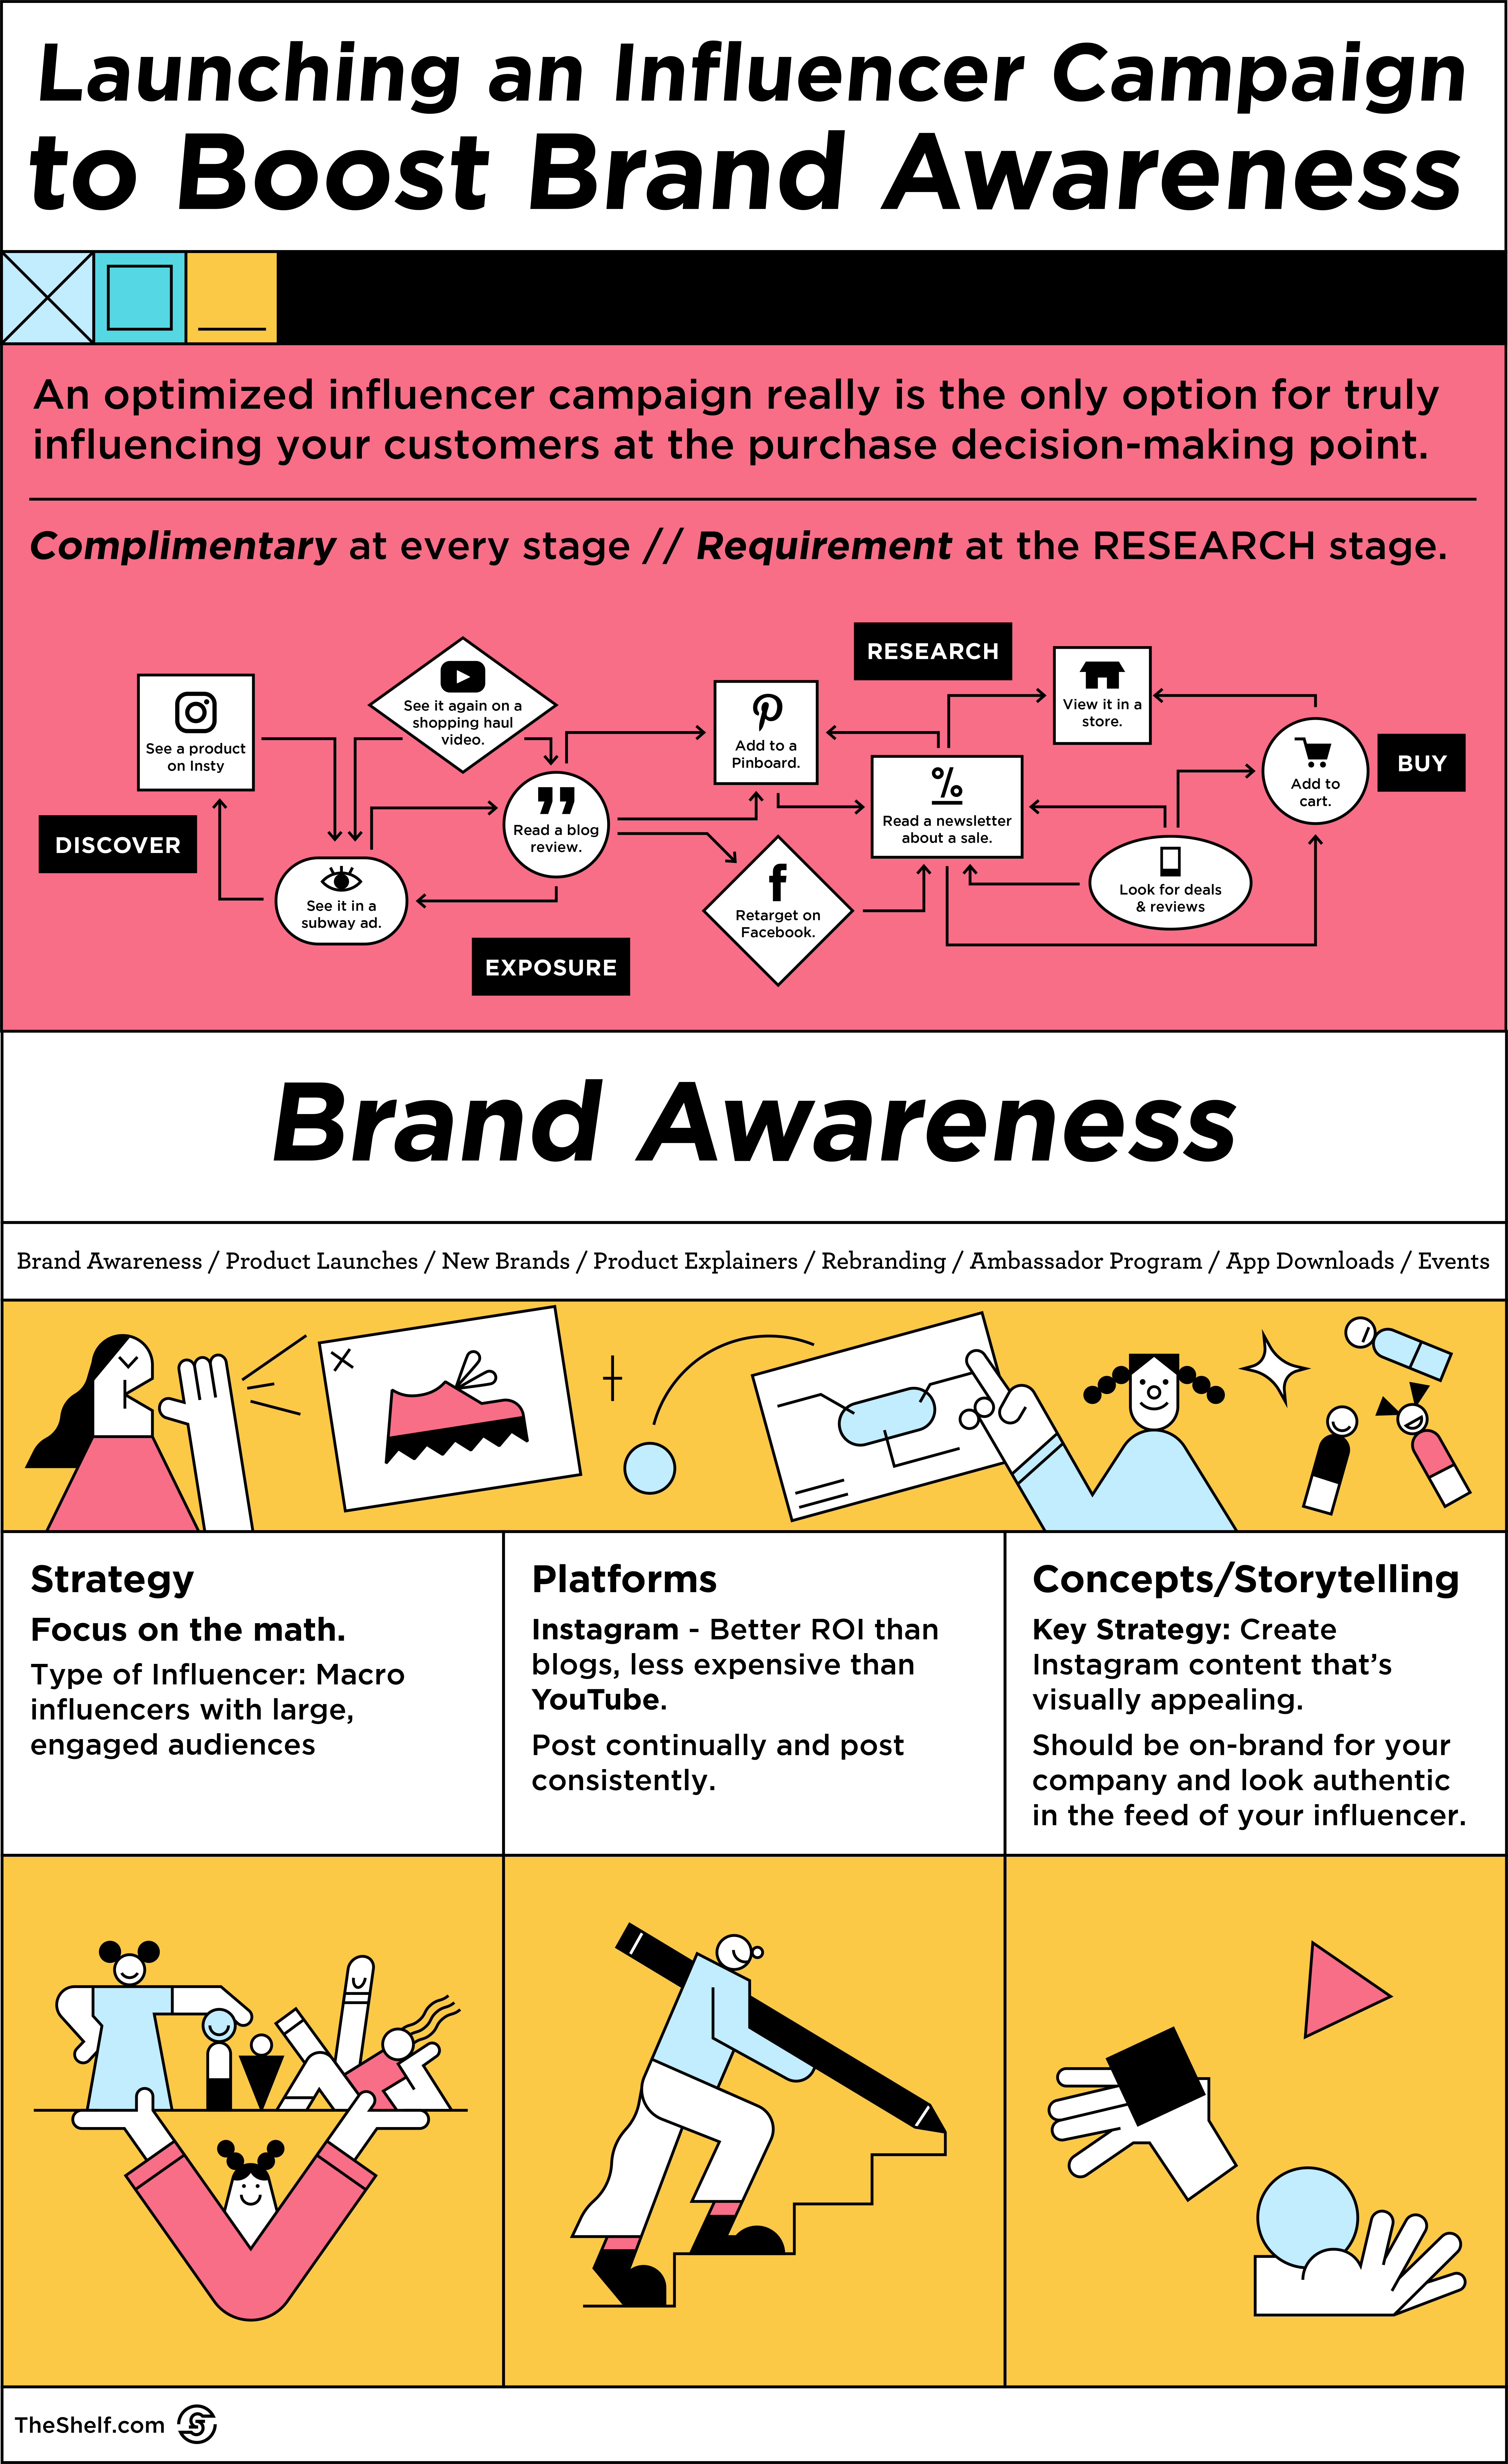 An infographic image of Launching an influencer campaign to Boost Brand Awareness INFOGRAPHIC EMBEDDED CODE